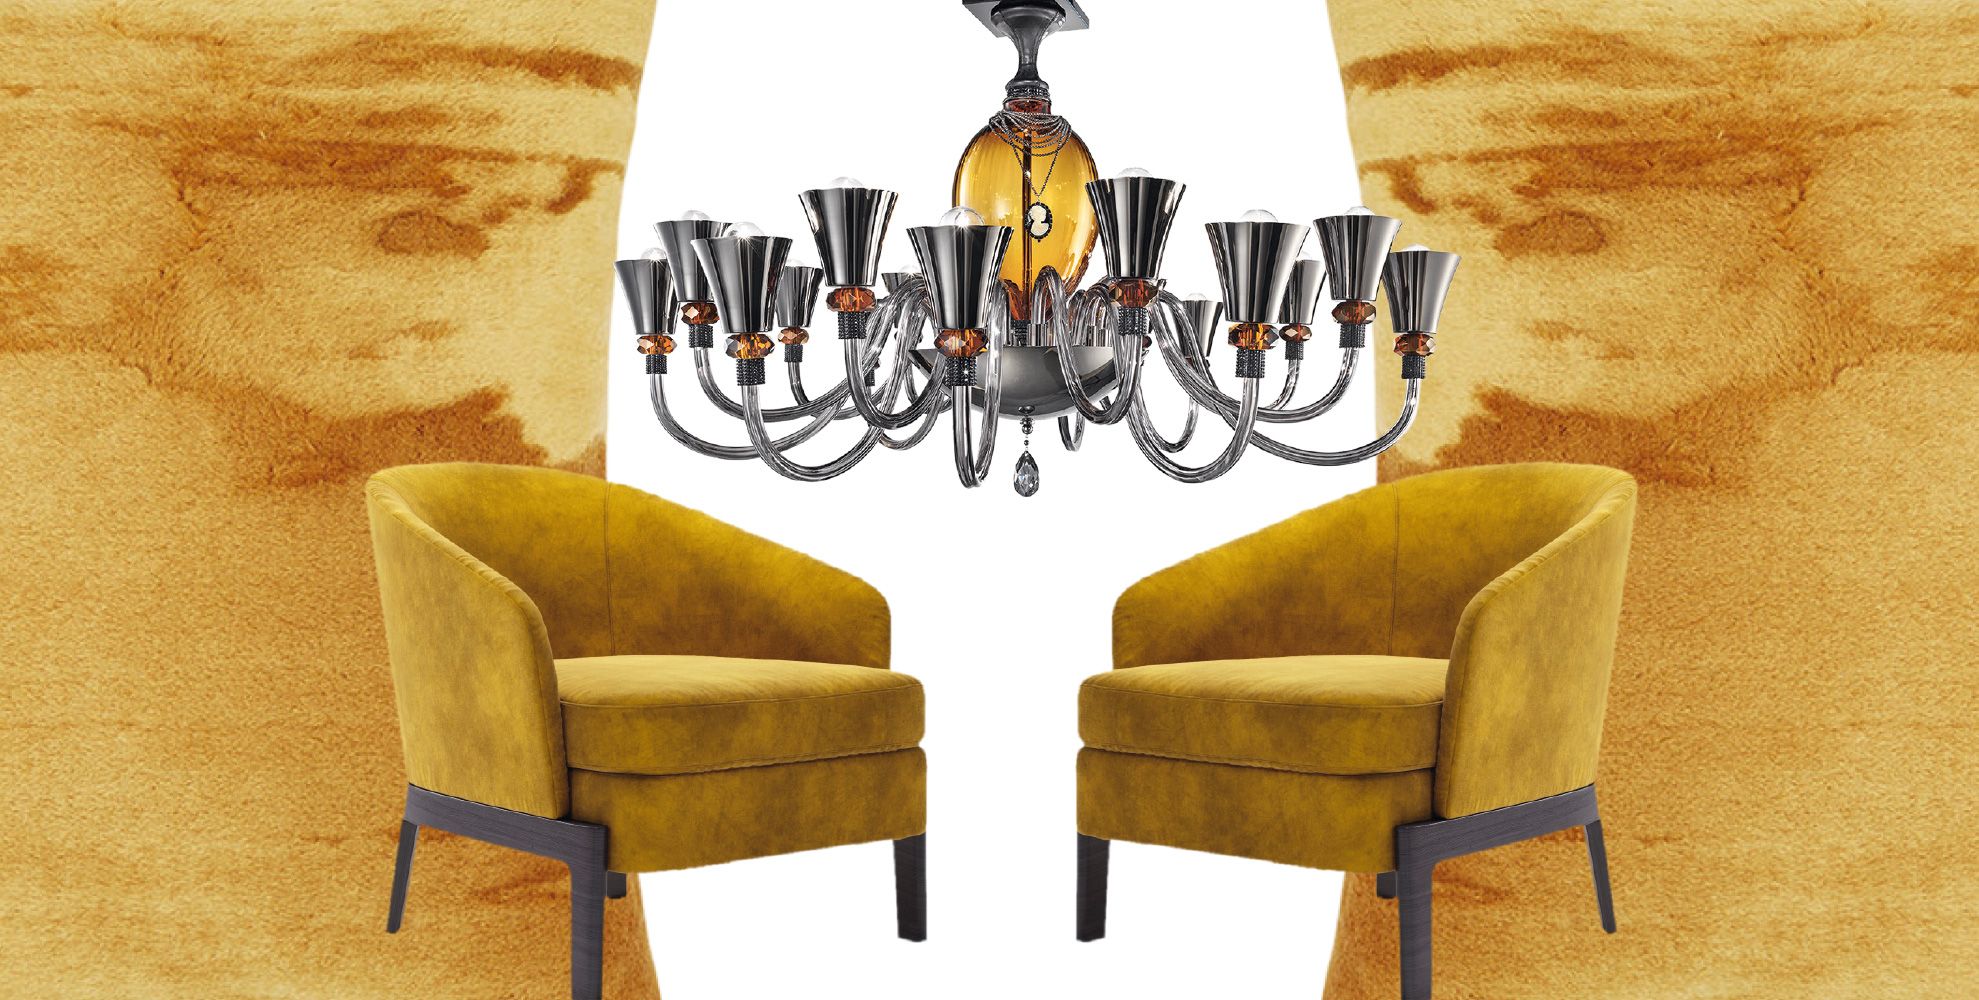 Chandelier, Yellow, Lighting, Light fixture, Room, Table, Wall, Furniture, Ceiling, Interior design, 